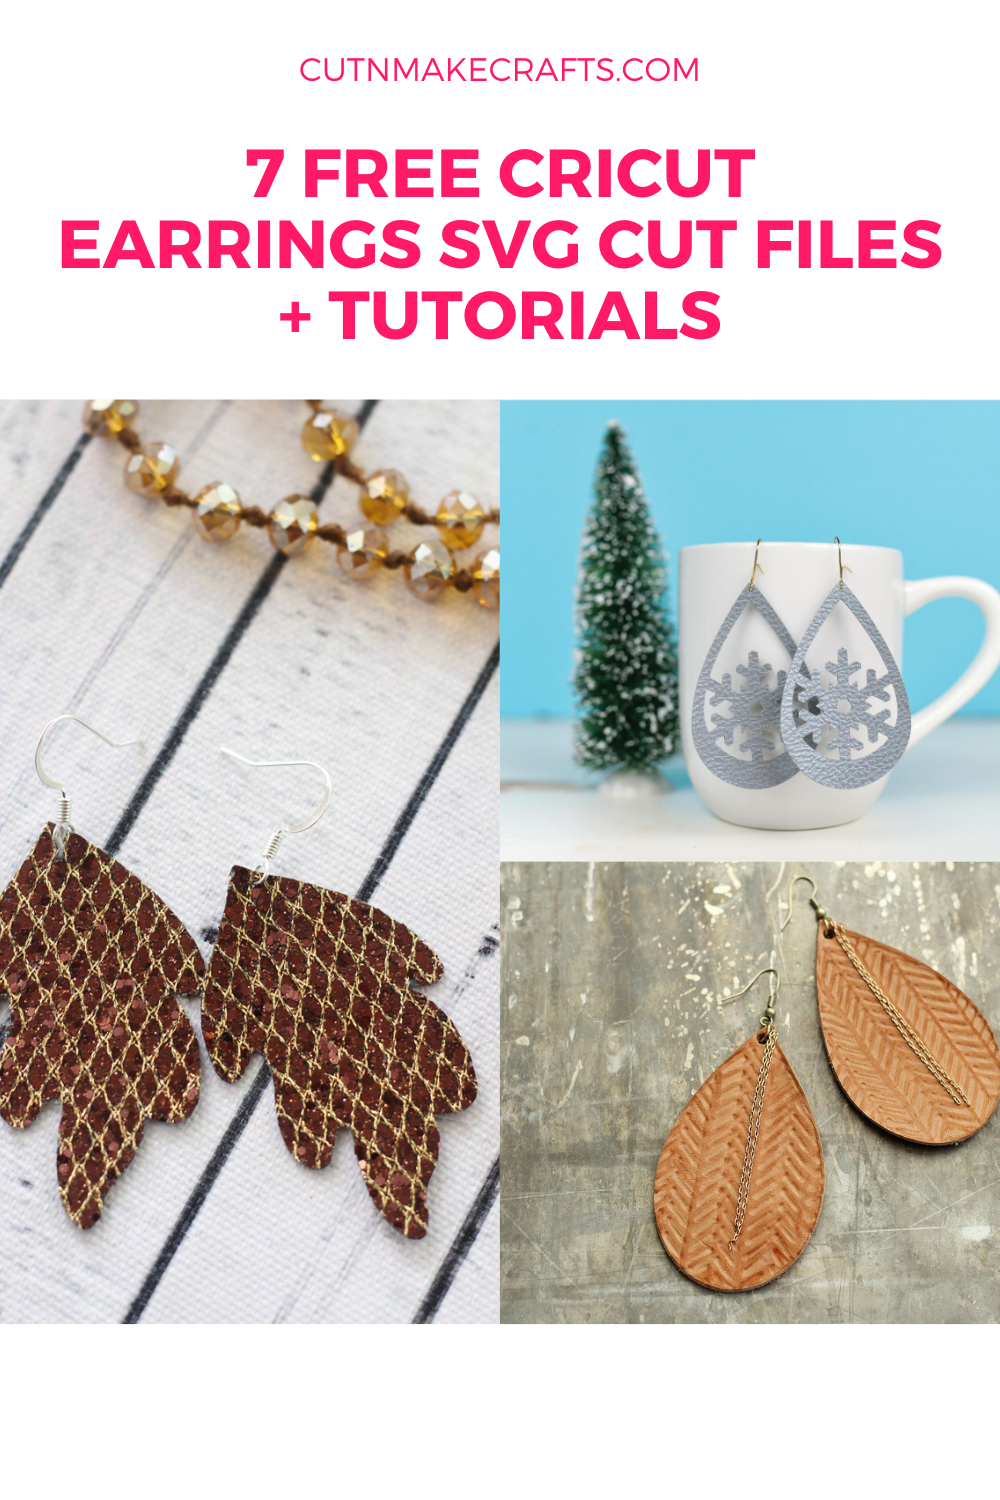 Download 7 Cricut Earring Tutorials With Free Earring Svg Cut Files